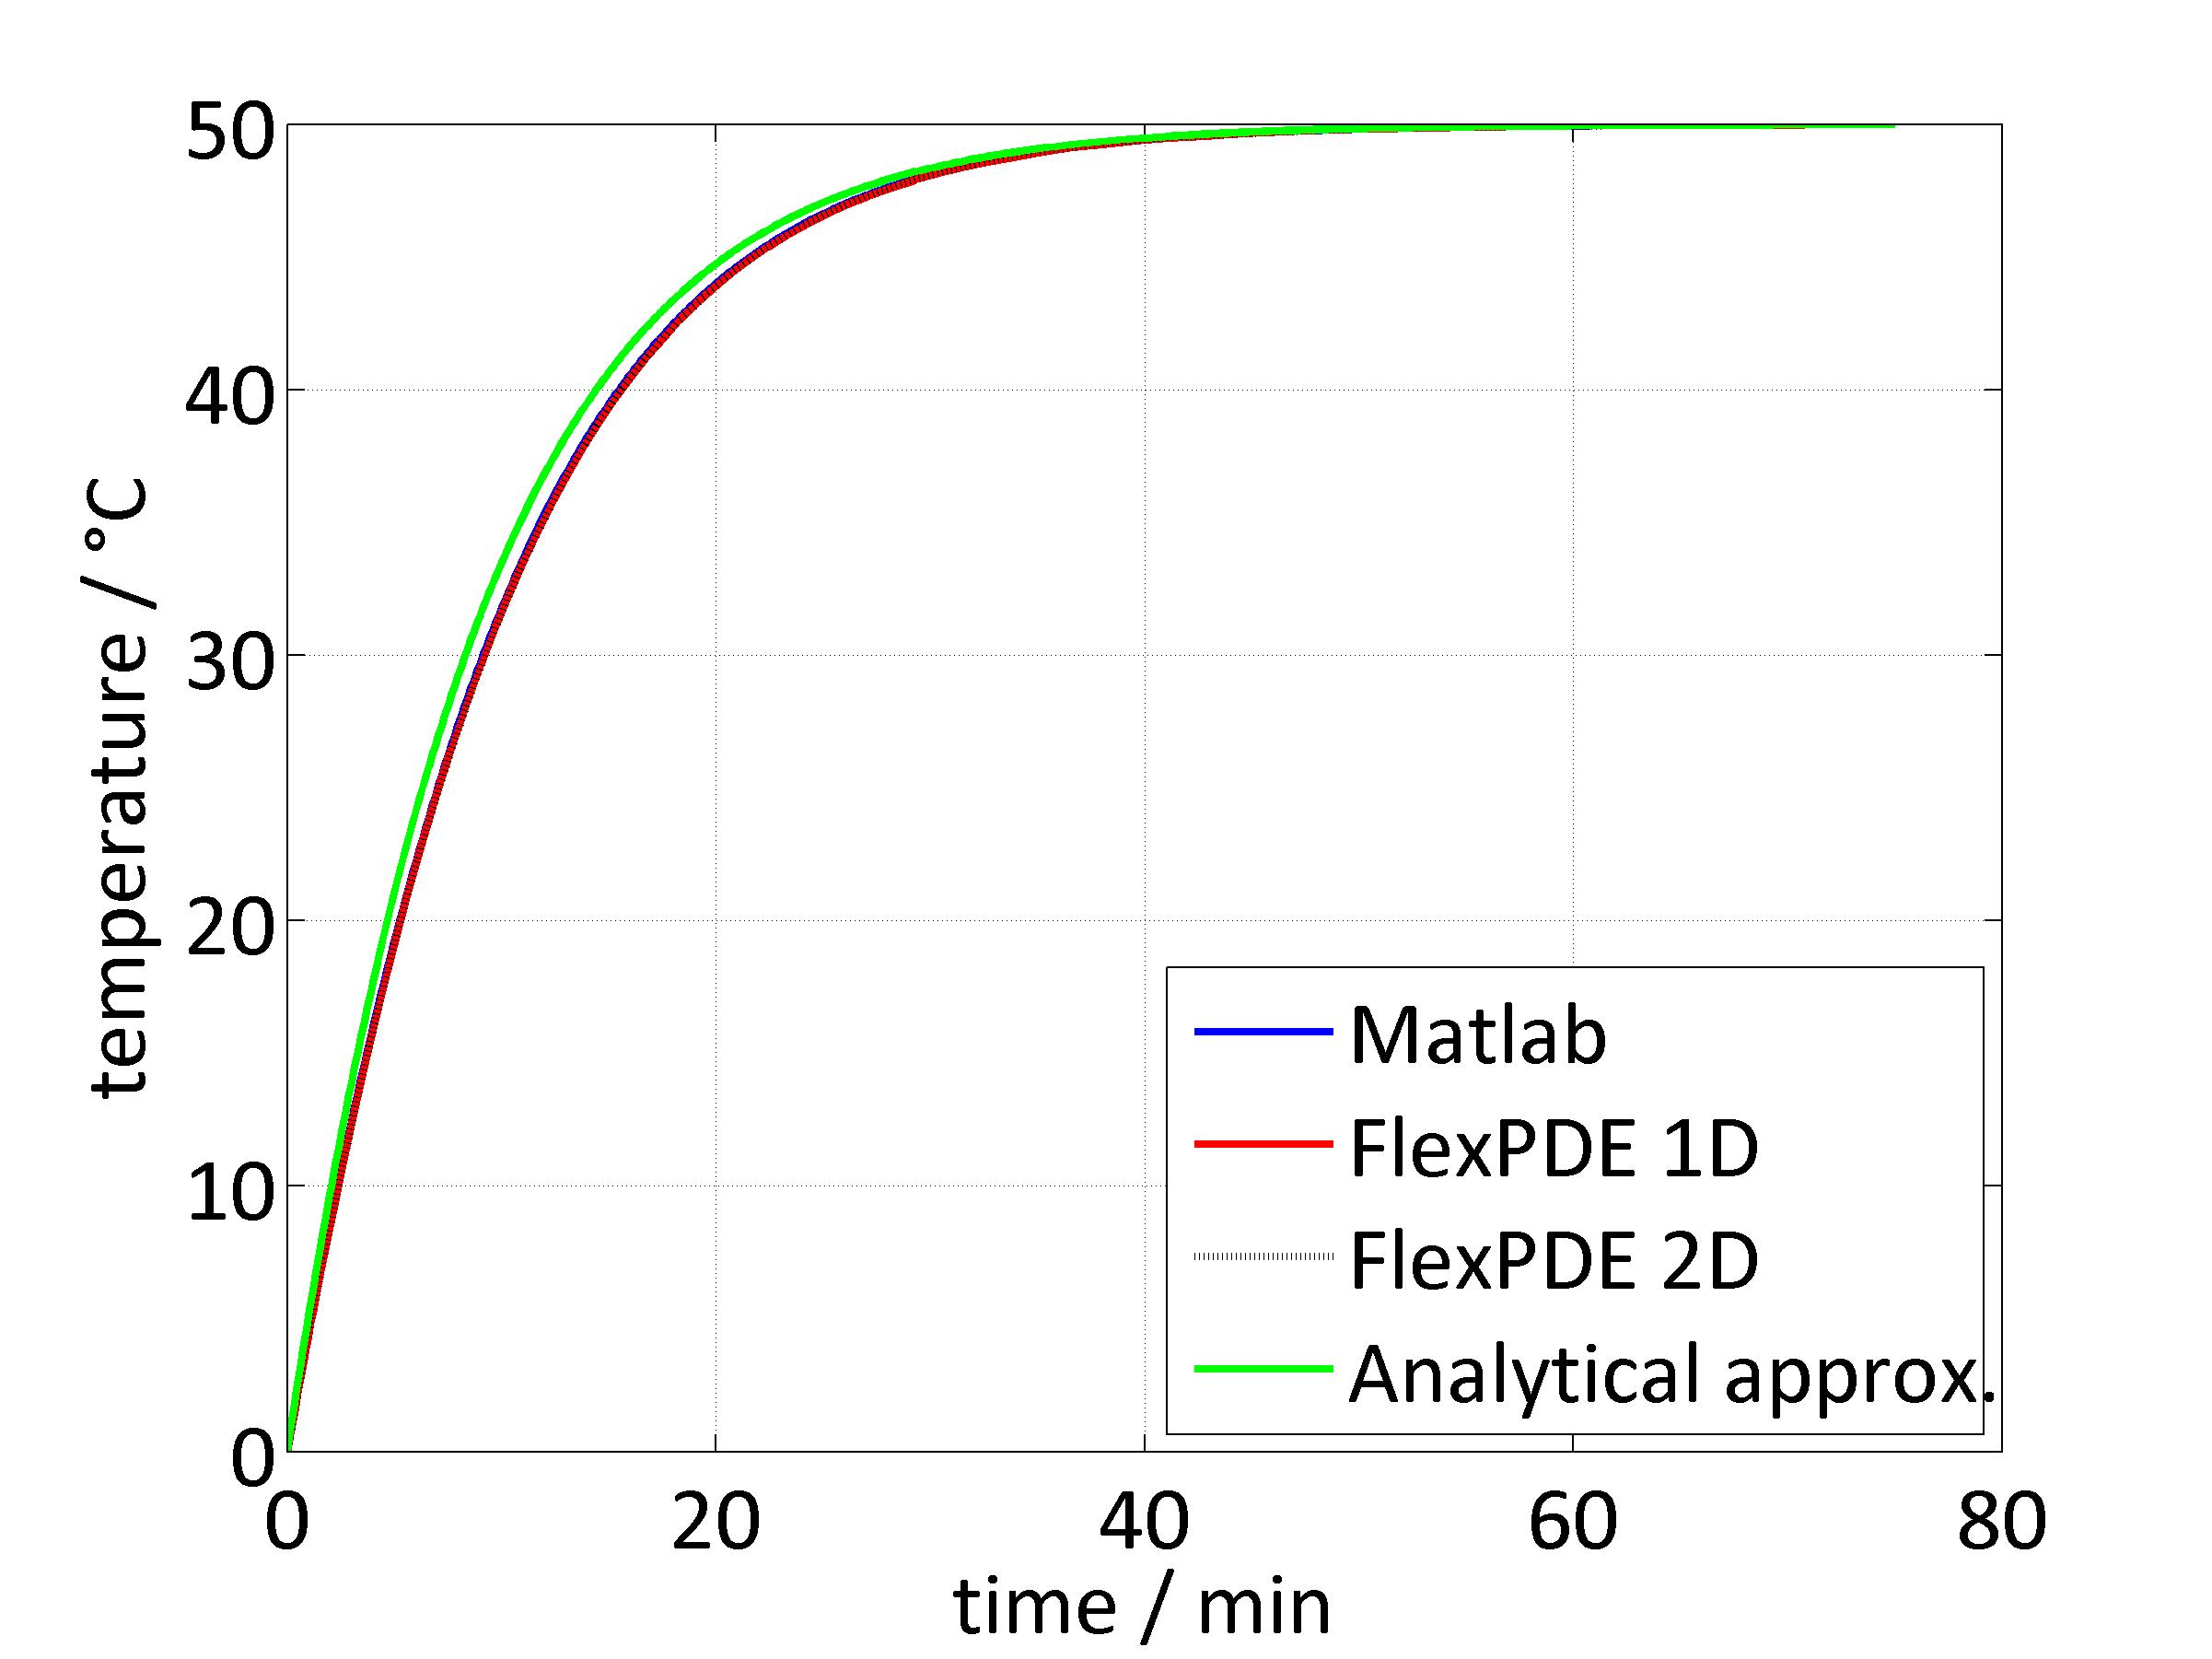 Comparison Matlab,FlexPDE,Analytical approx.